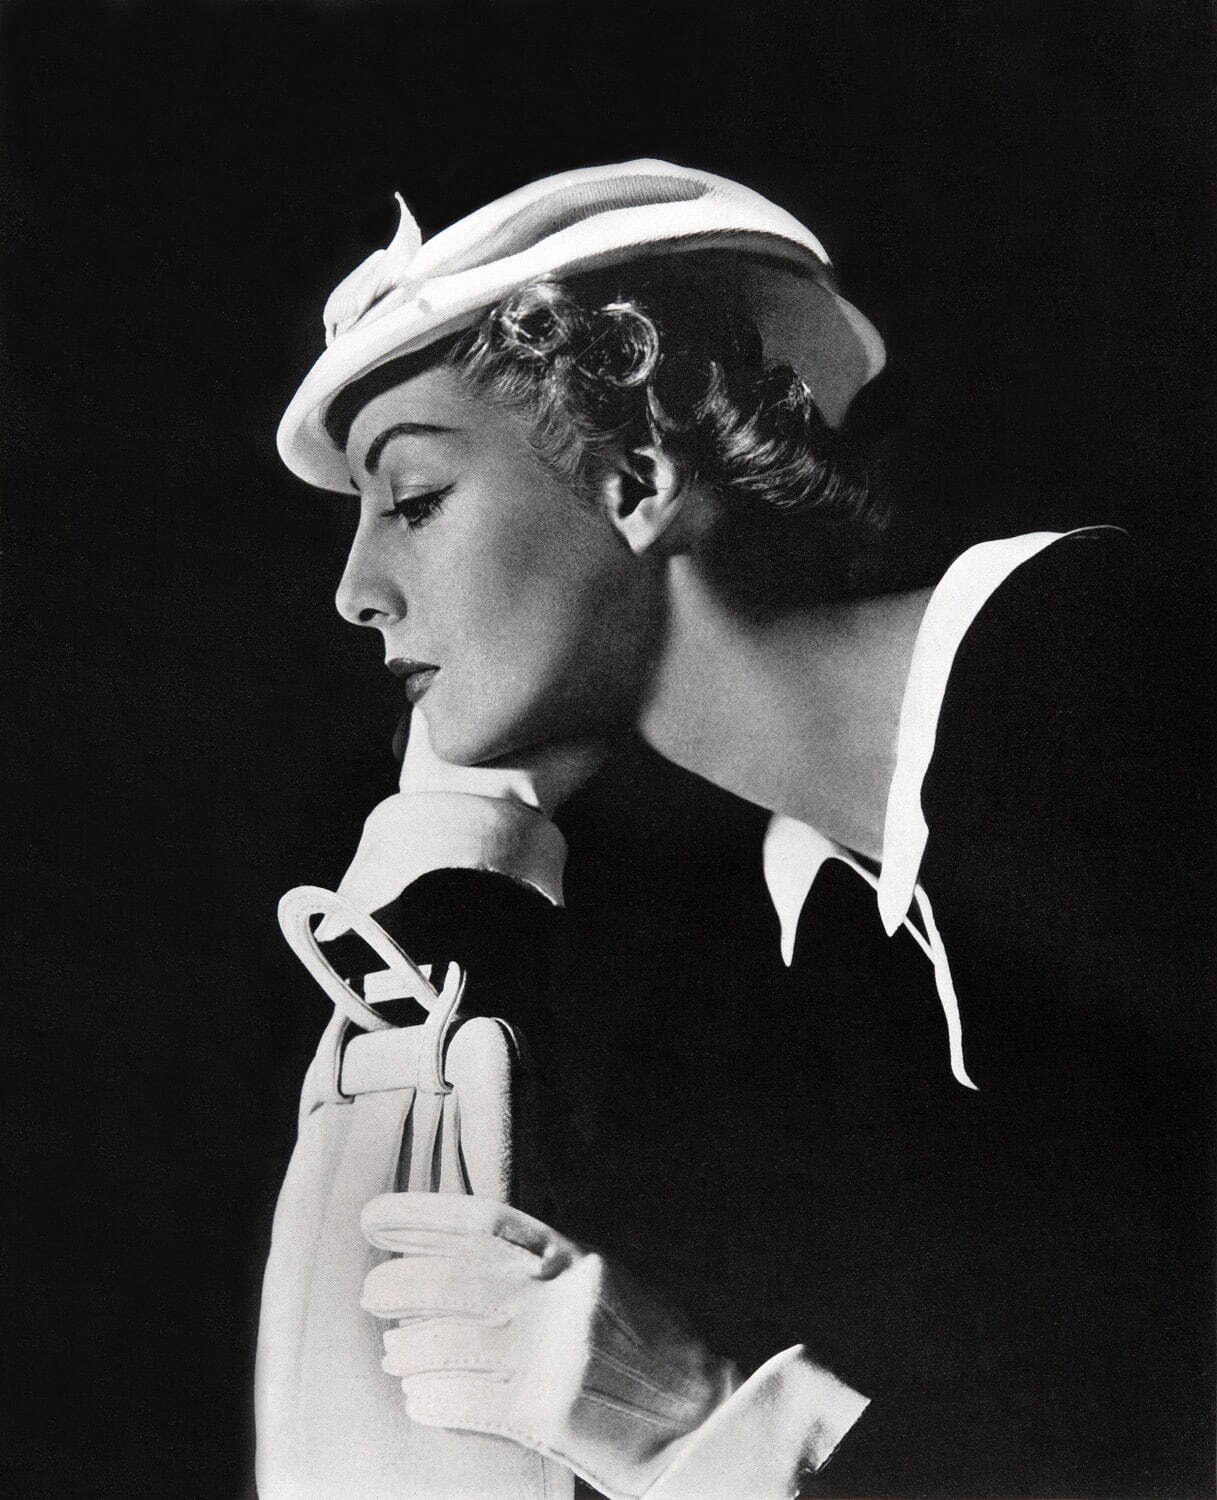 White piqué hat by CHANEL, white bagby Schiaparelli, 1936
©The George Hoyningen-Huene Estate Archives